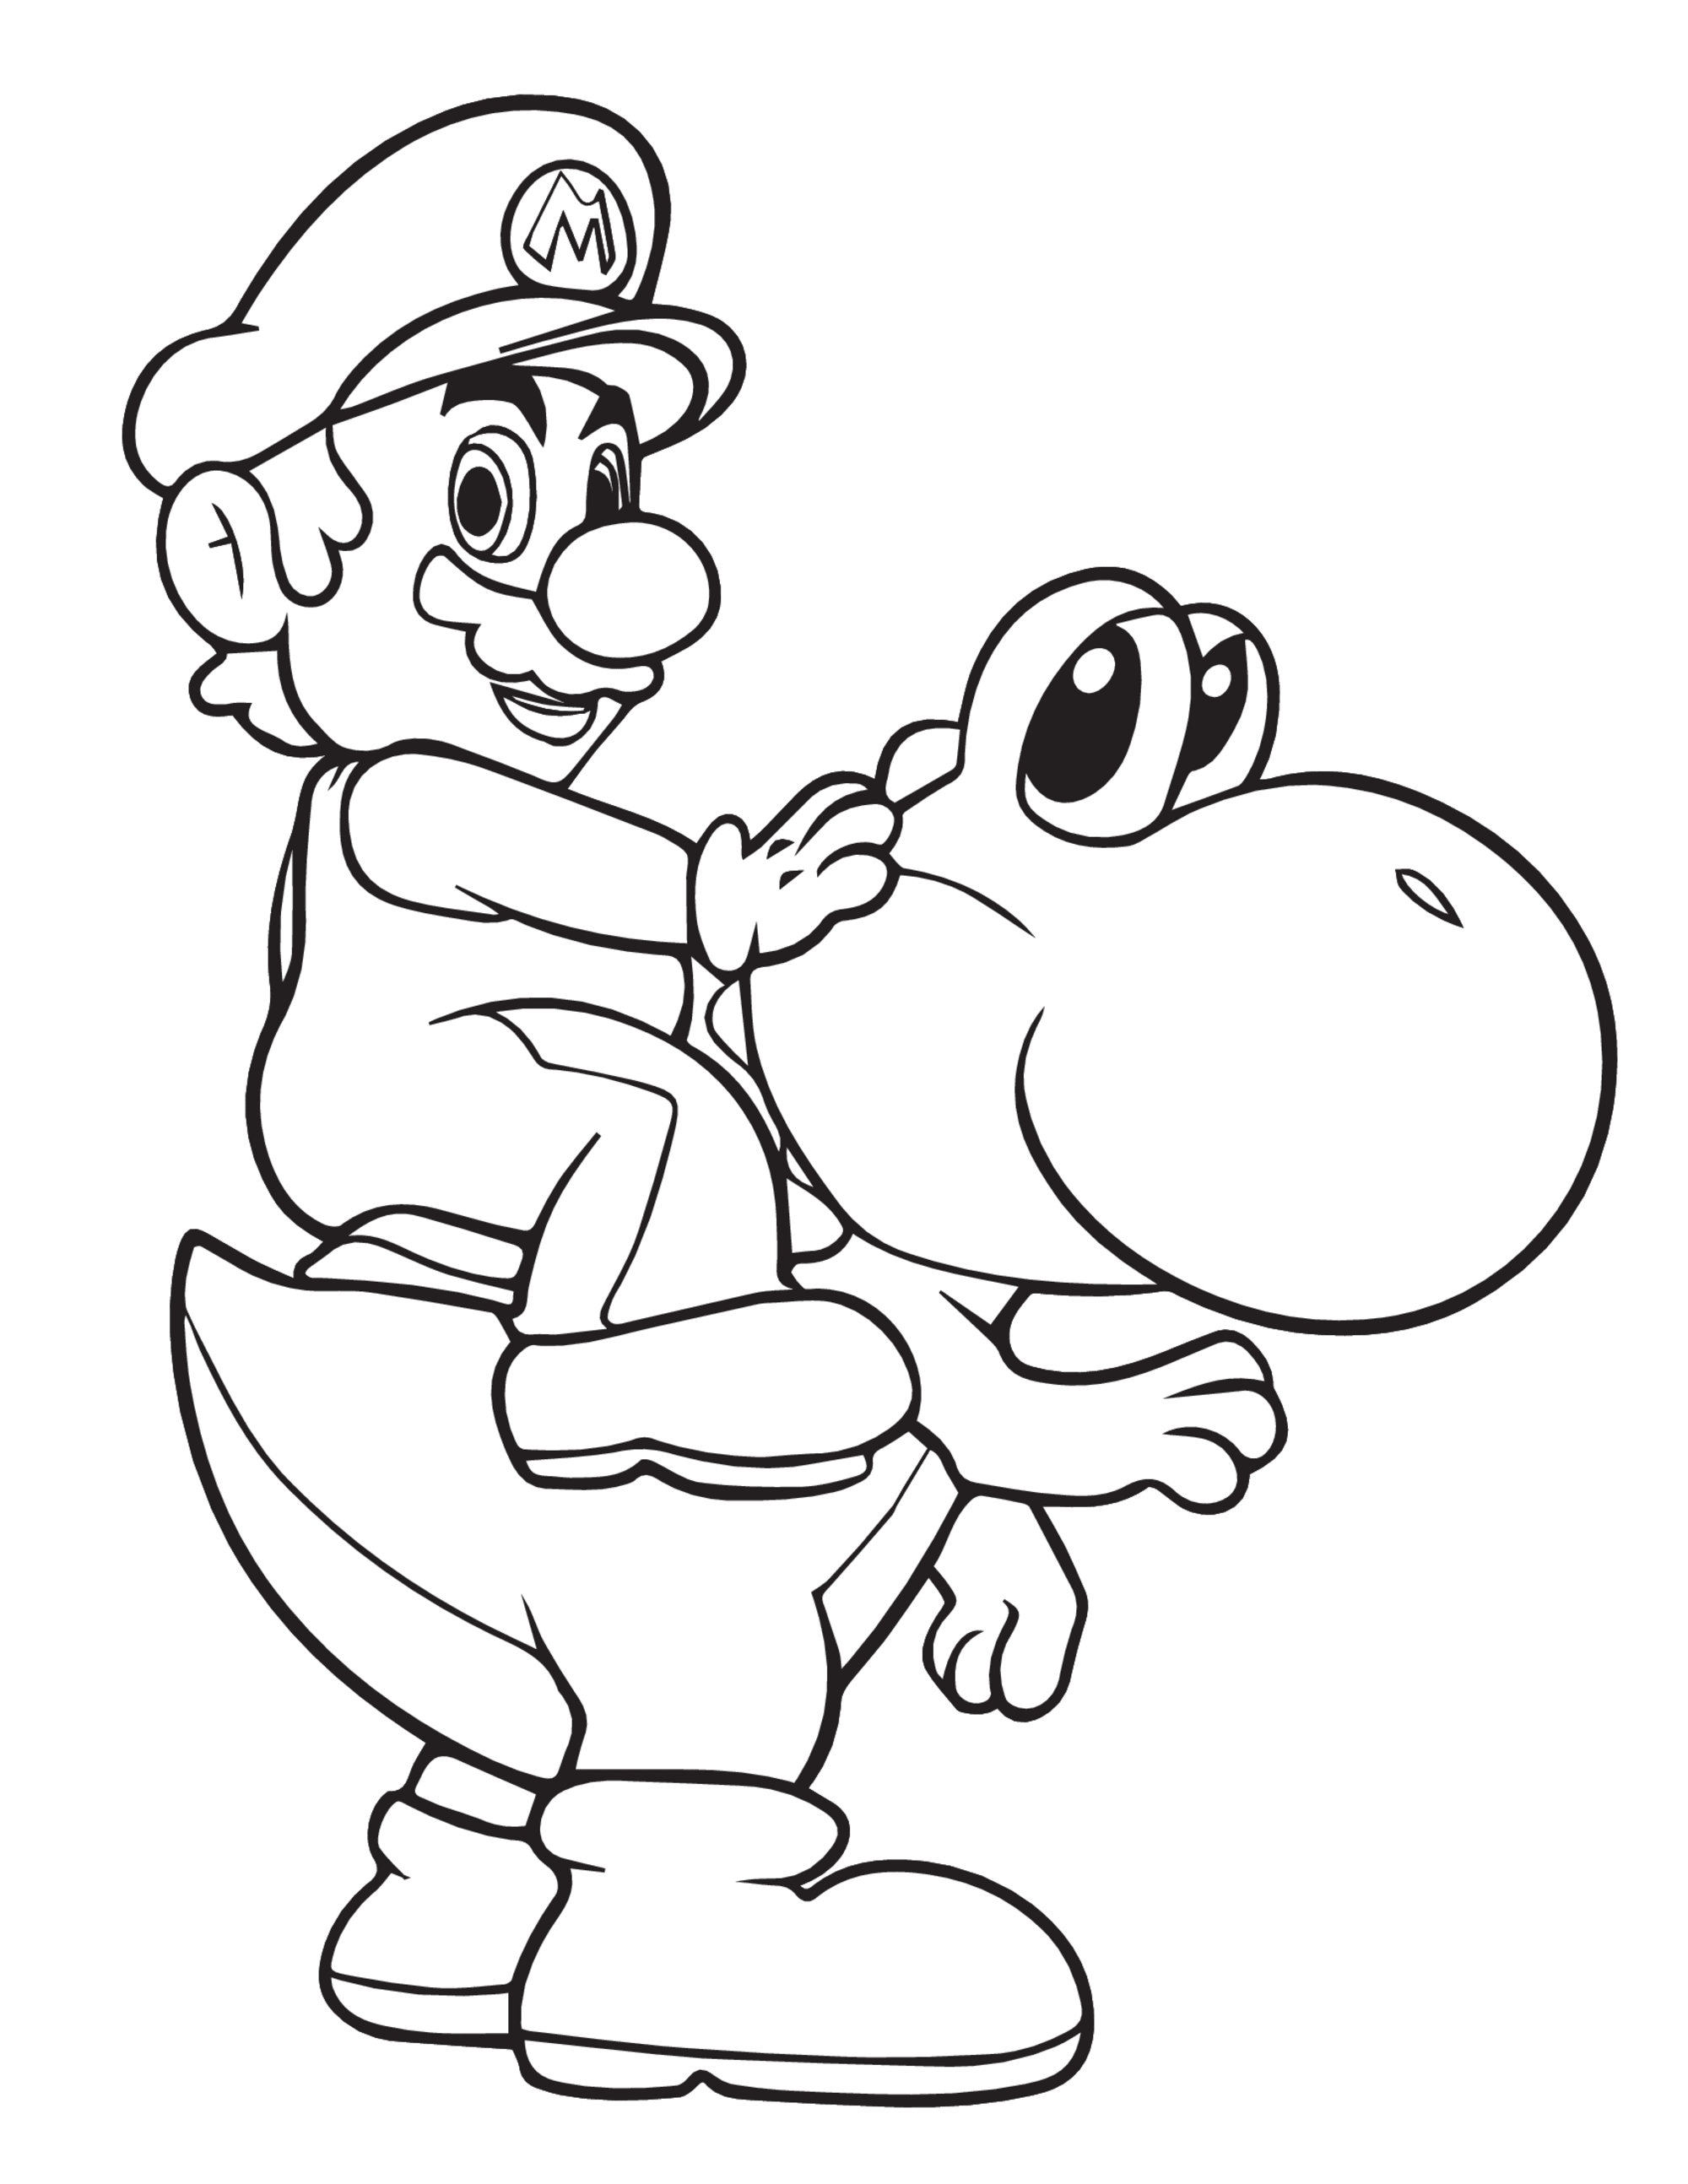 Super Mario Coloring Pages: 123 Adventures to Bring to Life with Color 119